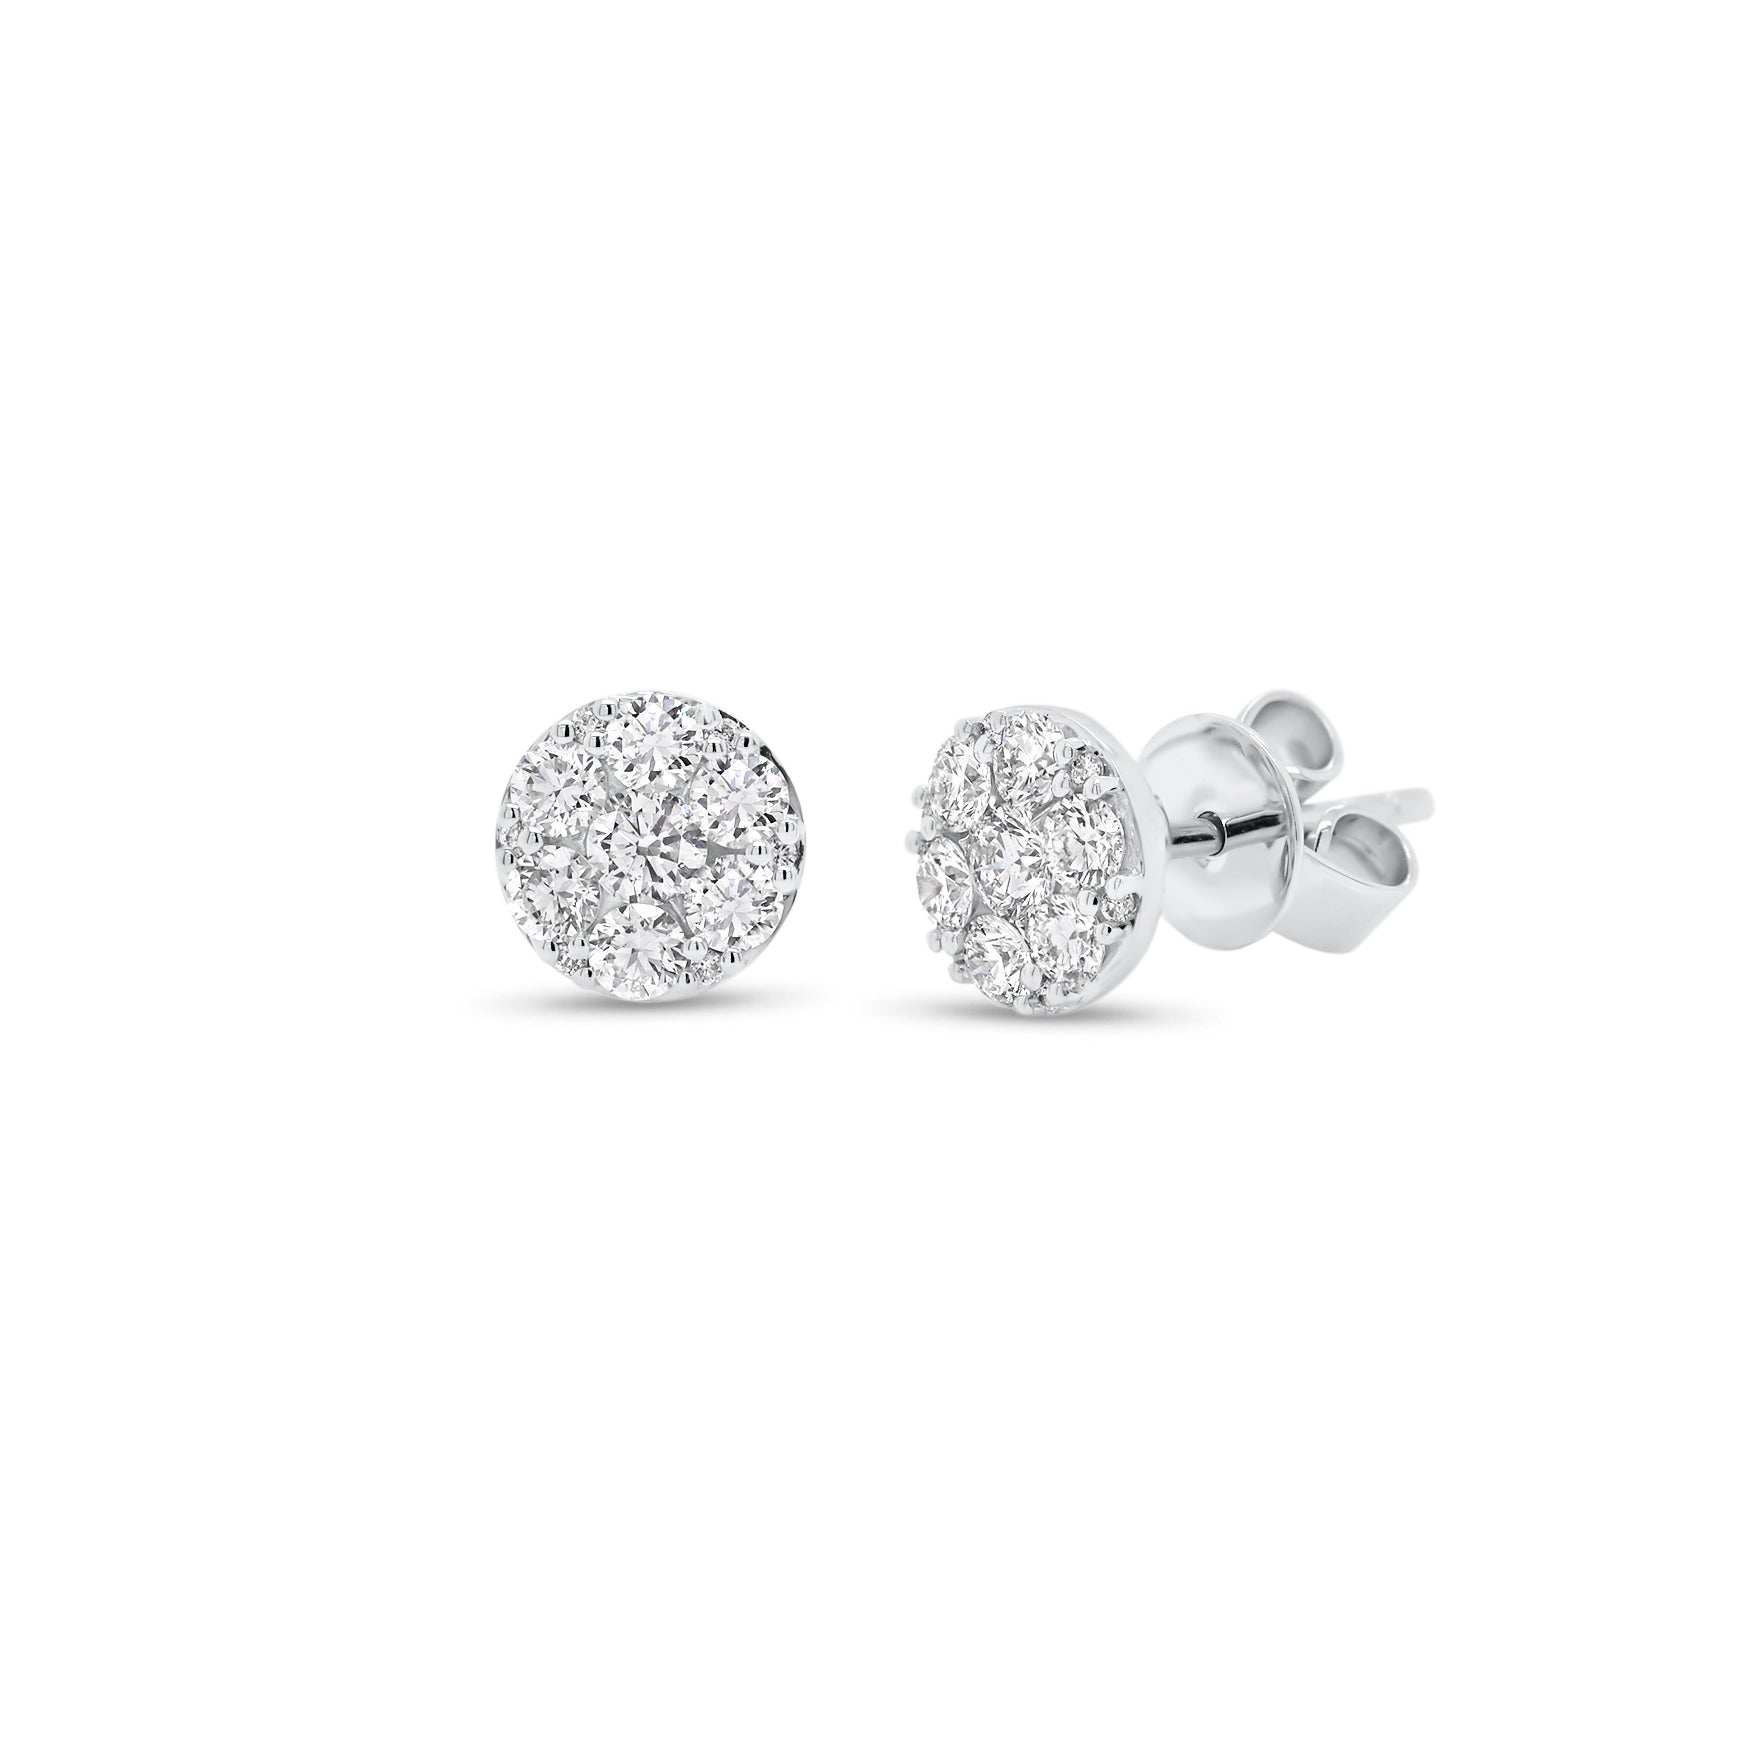 0.65 ct round diamond disc earrings - 18K gold weighing 1.92 grams  - 26 round diamonds totaling 0.65 carats